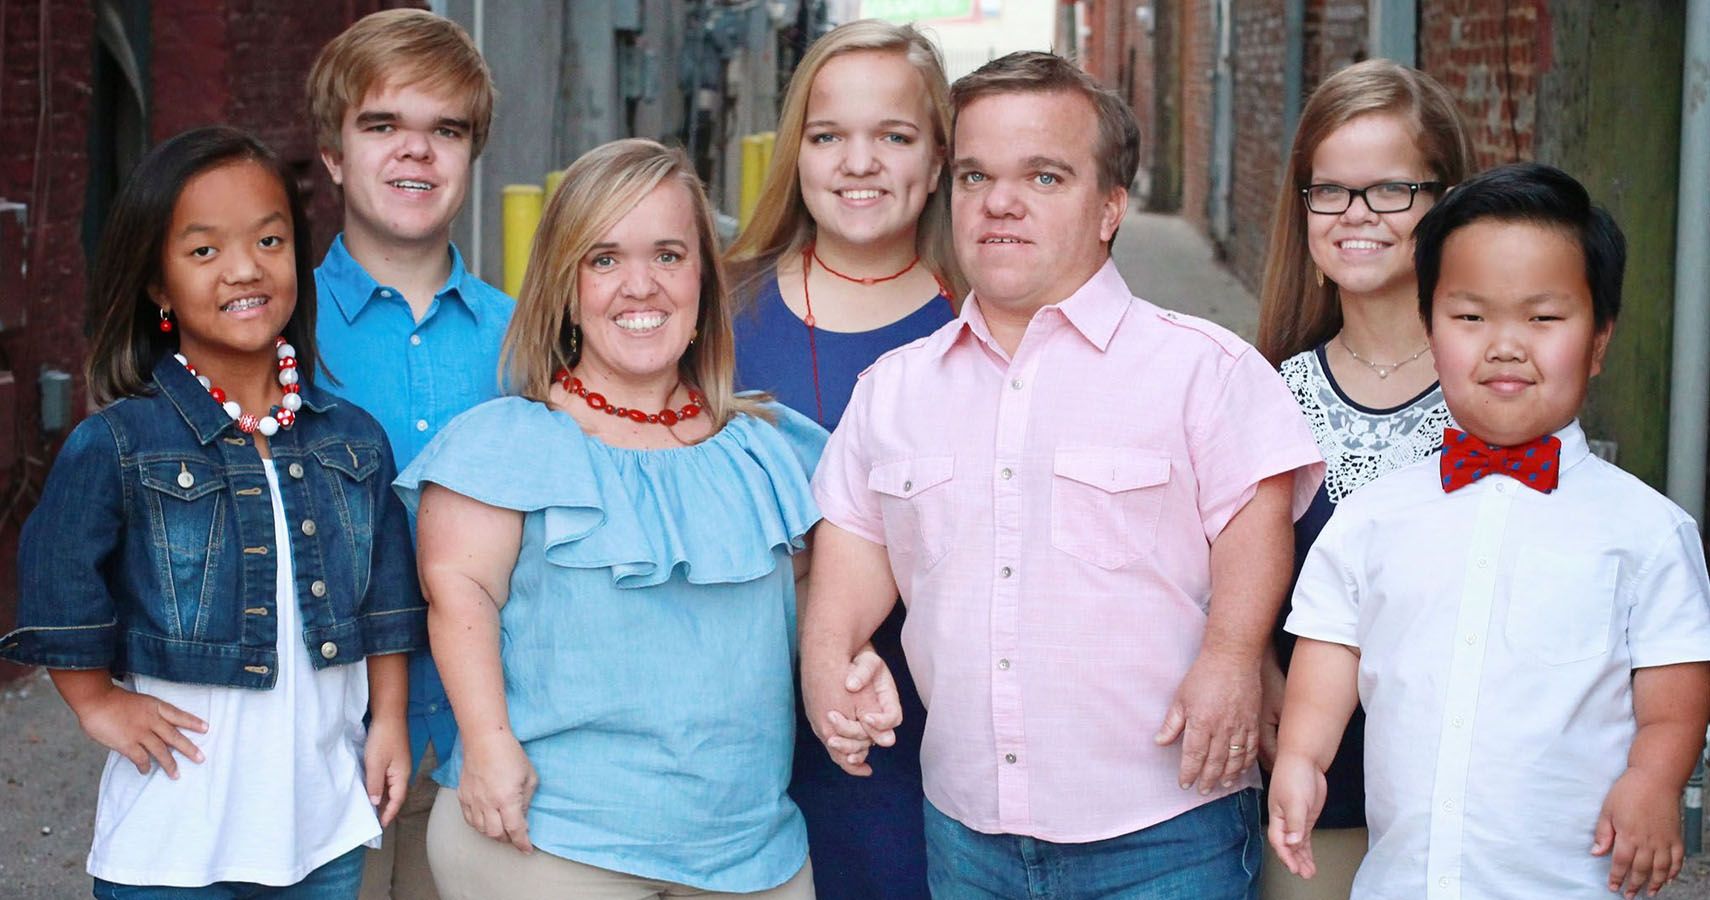 7 Little Johnstons What Most Fans Don't Know About The Family